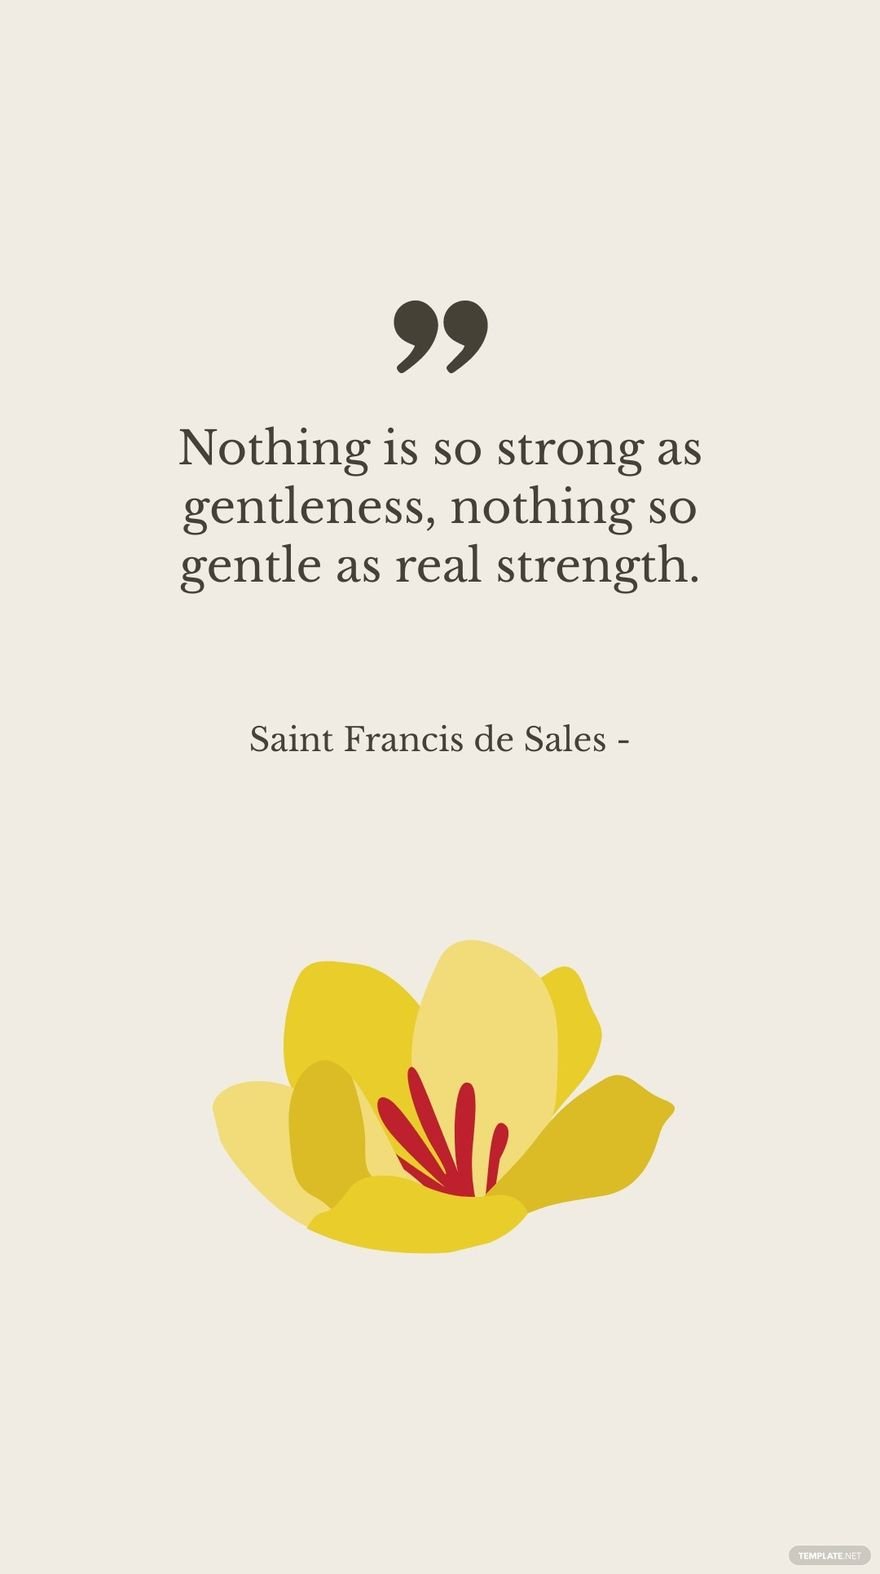 Saint Francis de Sales - Nothing is so strong as gentleness, nothing so gentle as real strength.